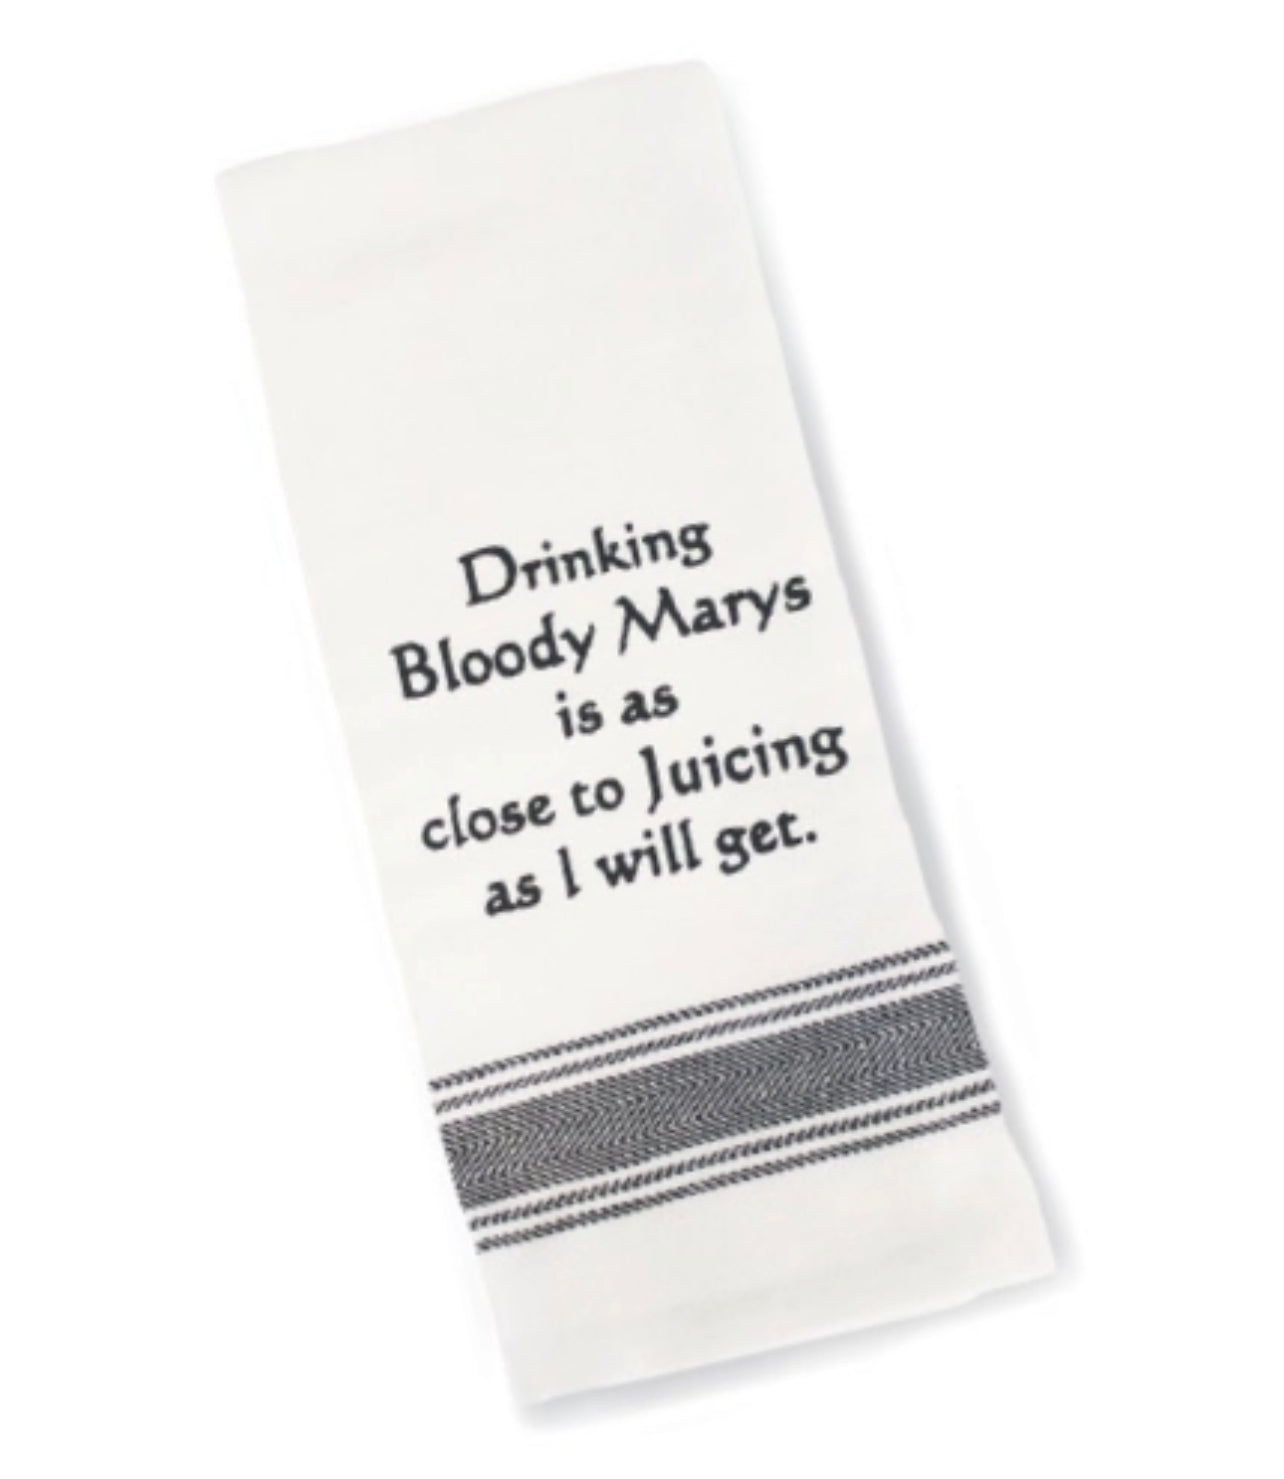 100% cotton tea towel in white for the kitchen with the saying "Drinking Bloody Marys is as close to juicing as I'm going to get"